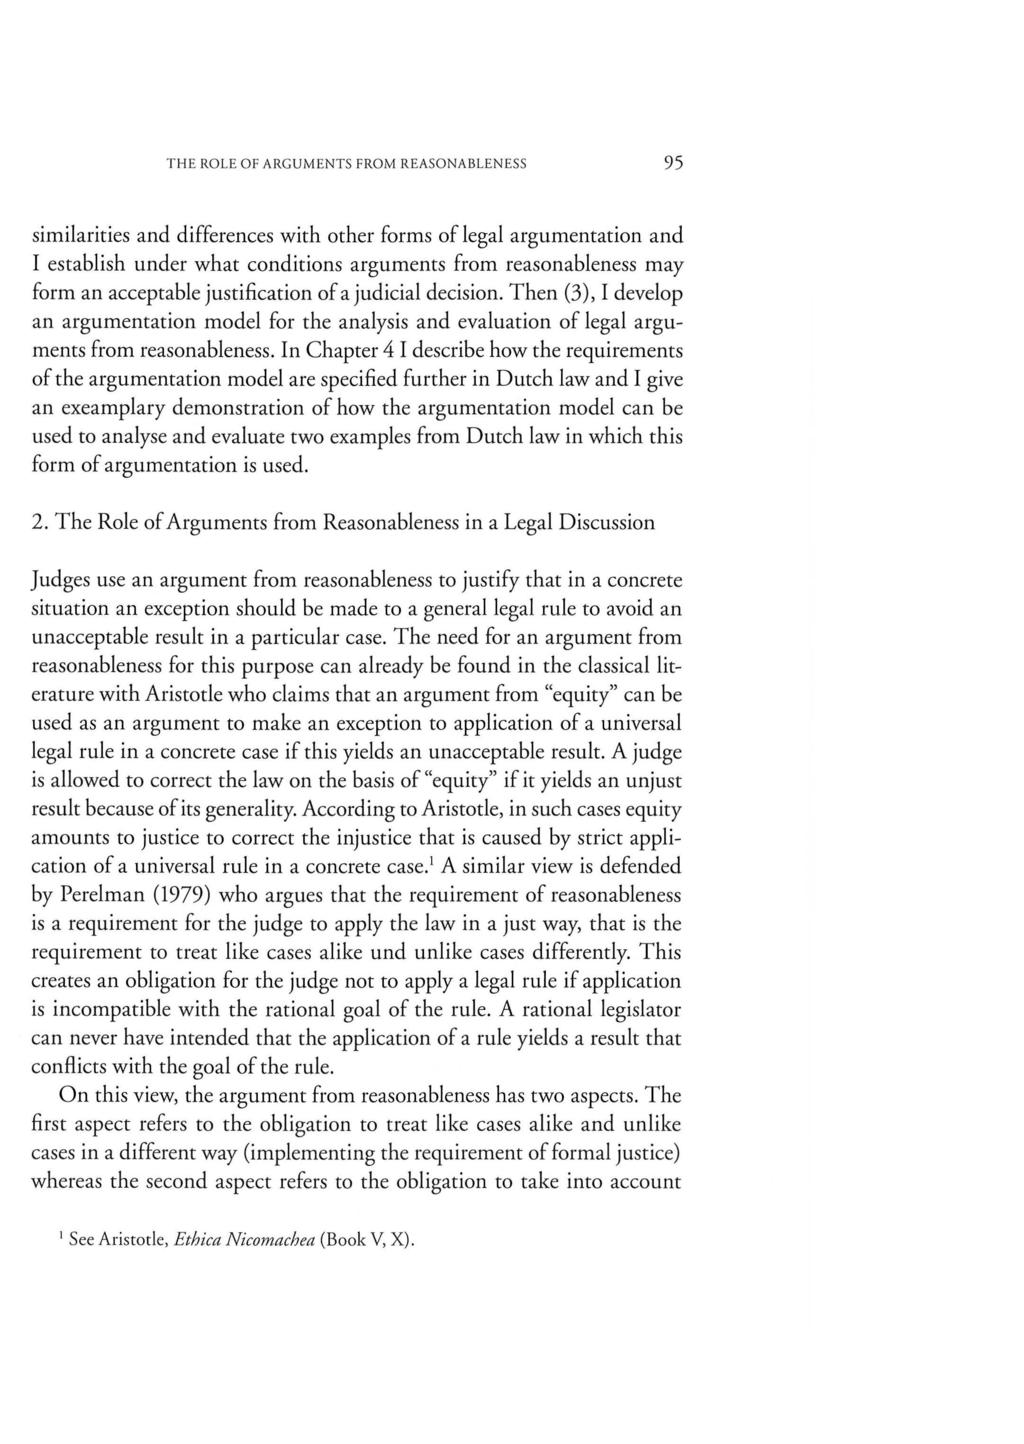 T H E RO LE OF ARGUMENTS FROM REASONA BLE NESS 95 similarities and differences with other forms of legal argumentation and 1 establish under what conditions arguments from reasonableness may form an